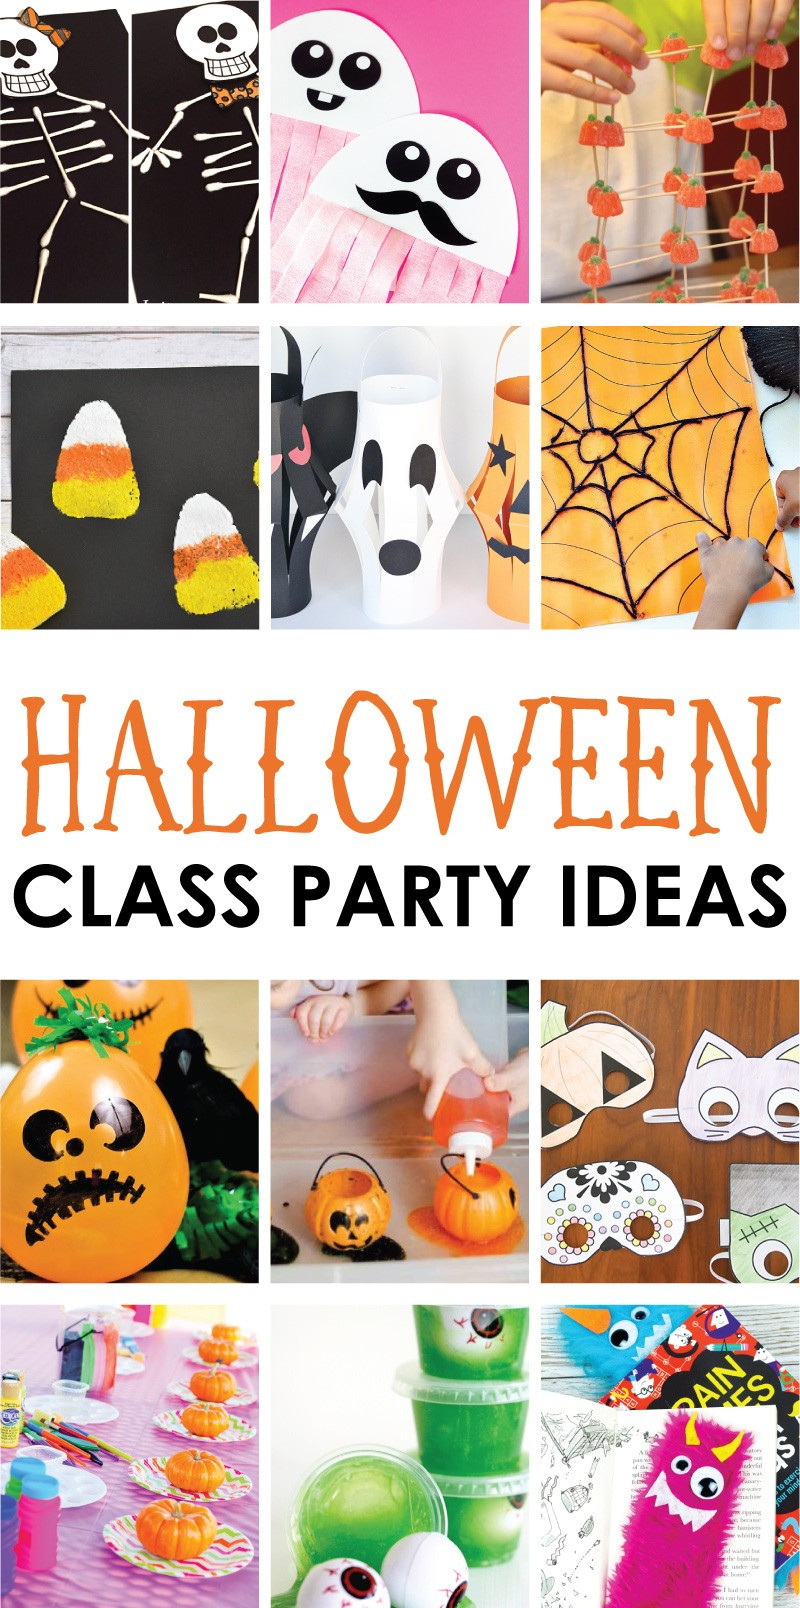 Halloween Classroom Party Ideas
 12 Halloween Class Party Ideas and Activities on Love the Day